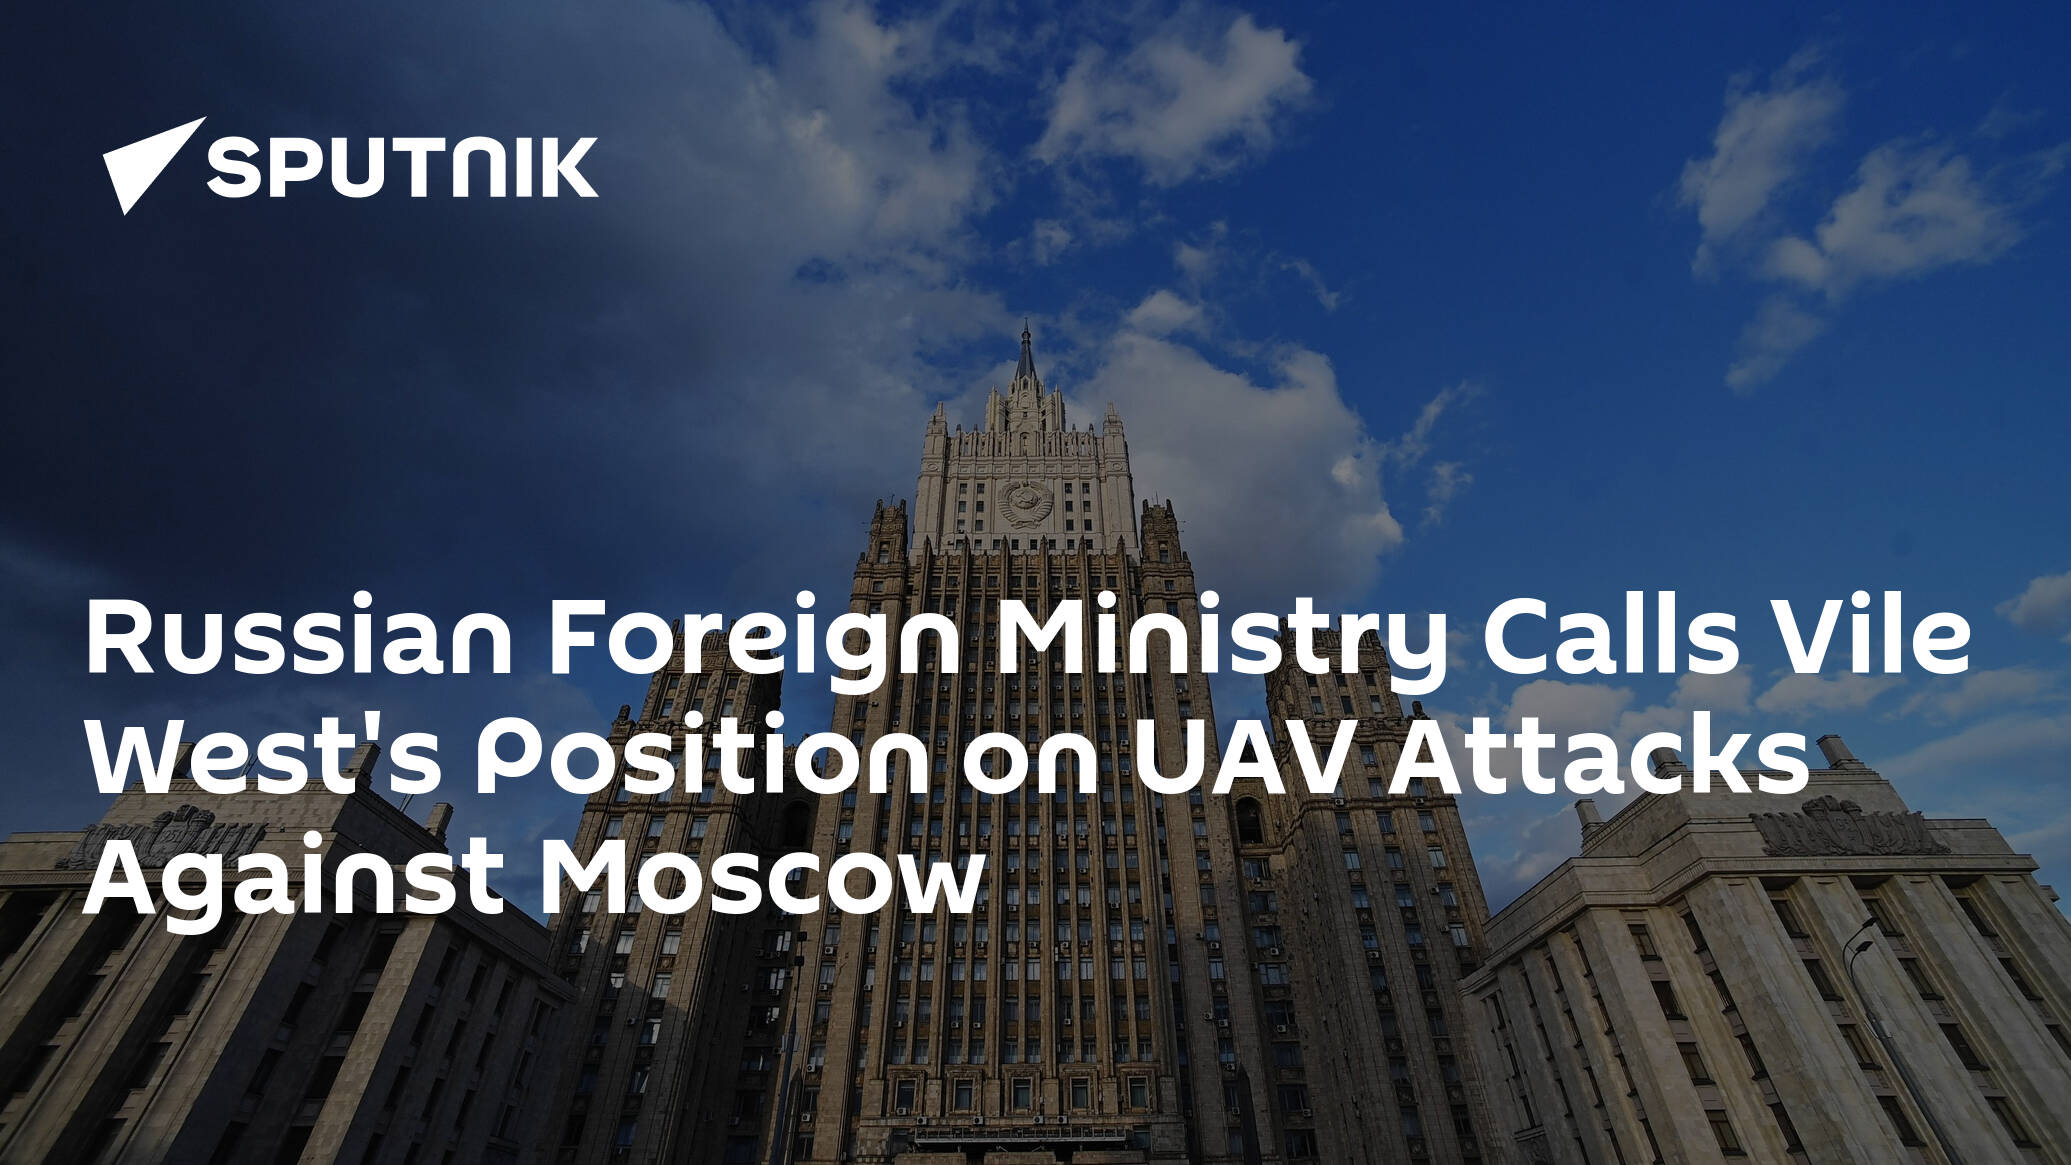 Russian Foreign Ministry Calls Vile West's Position on UAV Attacks Against Moscow